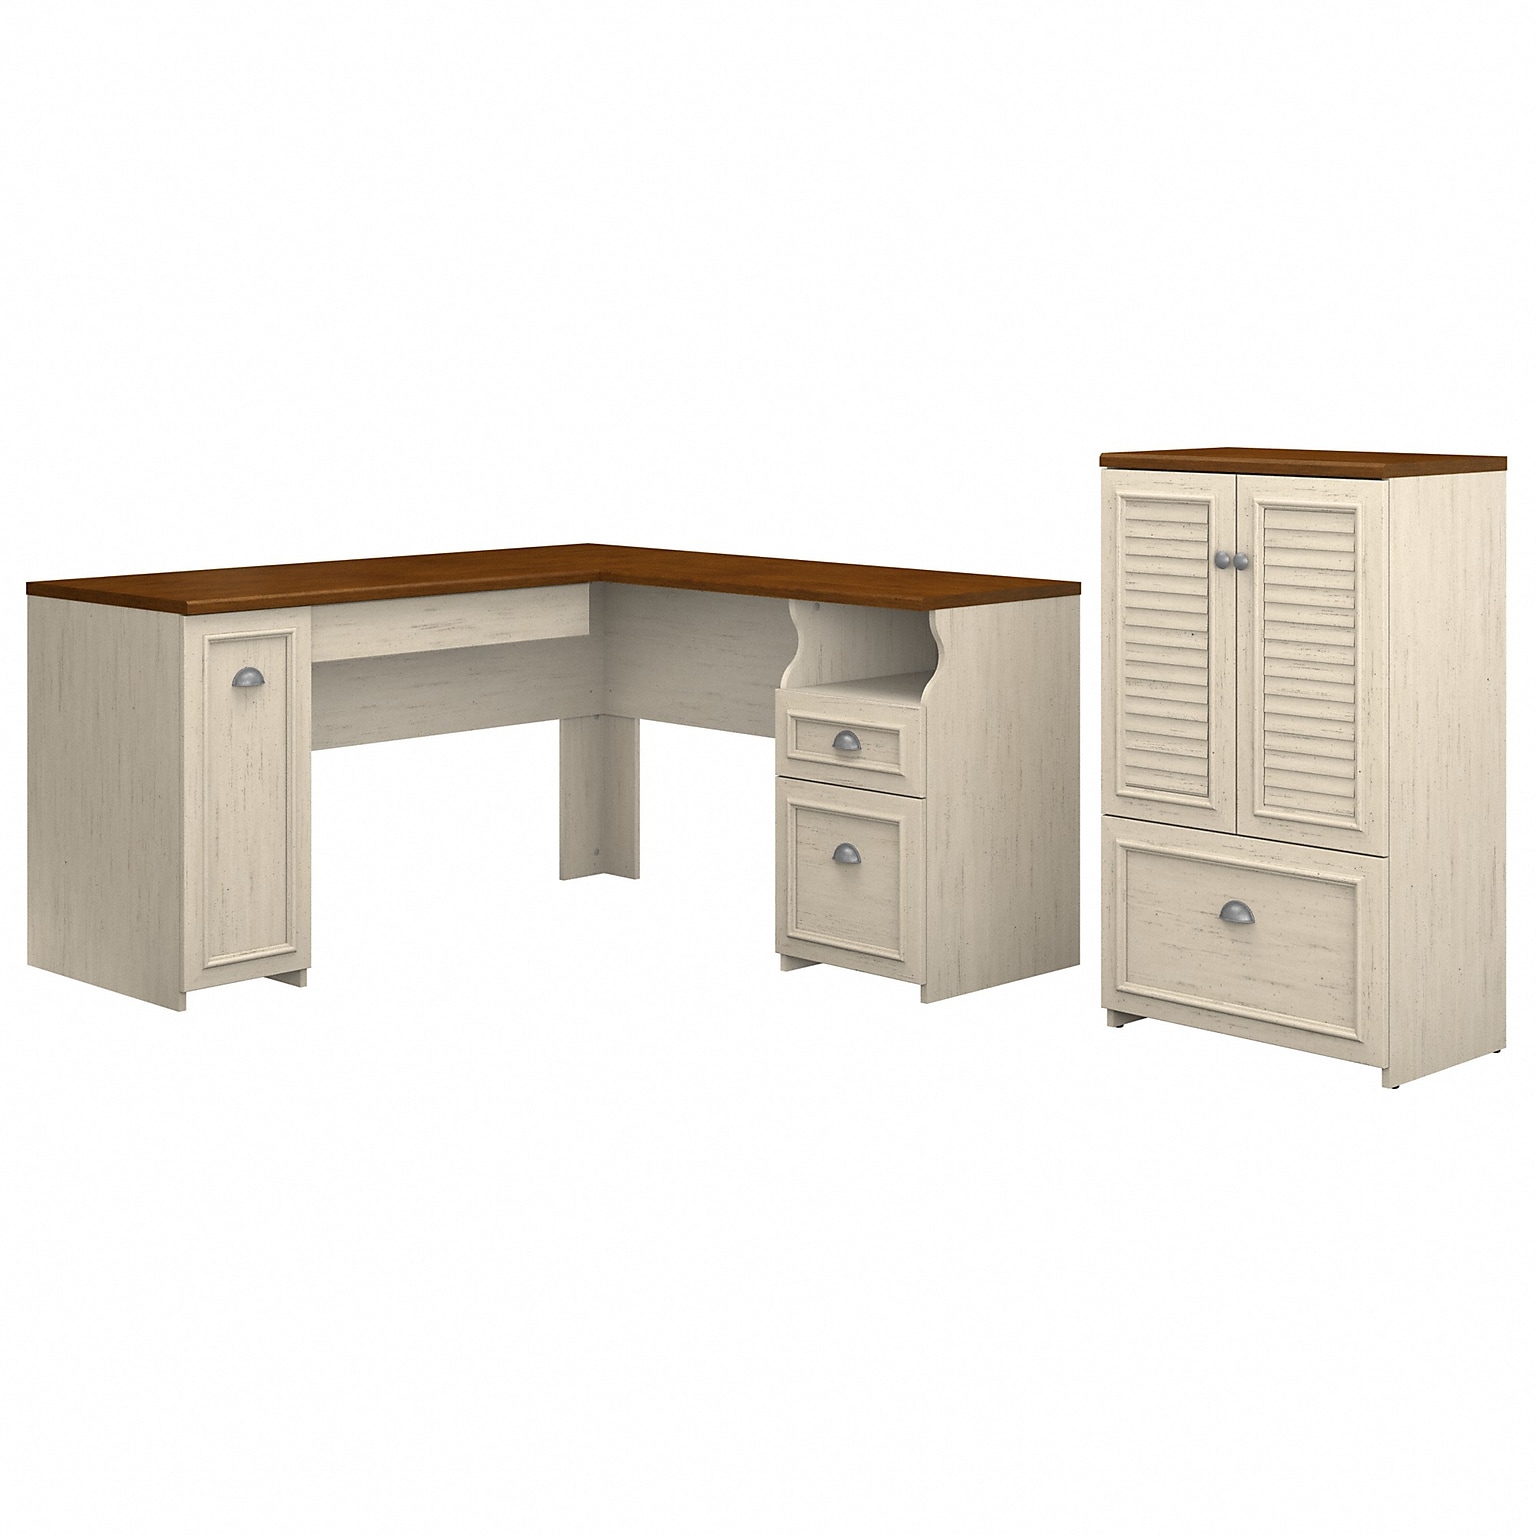 Bush Furniture Fairview 60W L Shaped Desk and 2 Door Storage Cabinet with File Drawer, Antique White/Tea Maple (FV009AW)